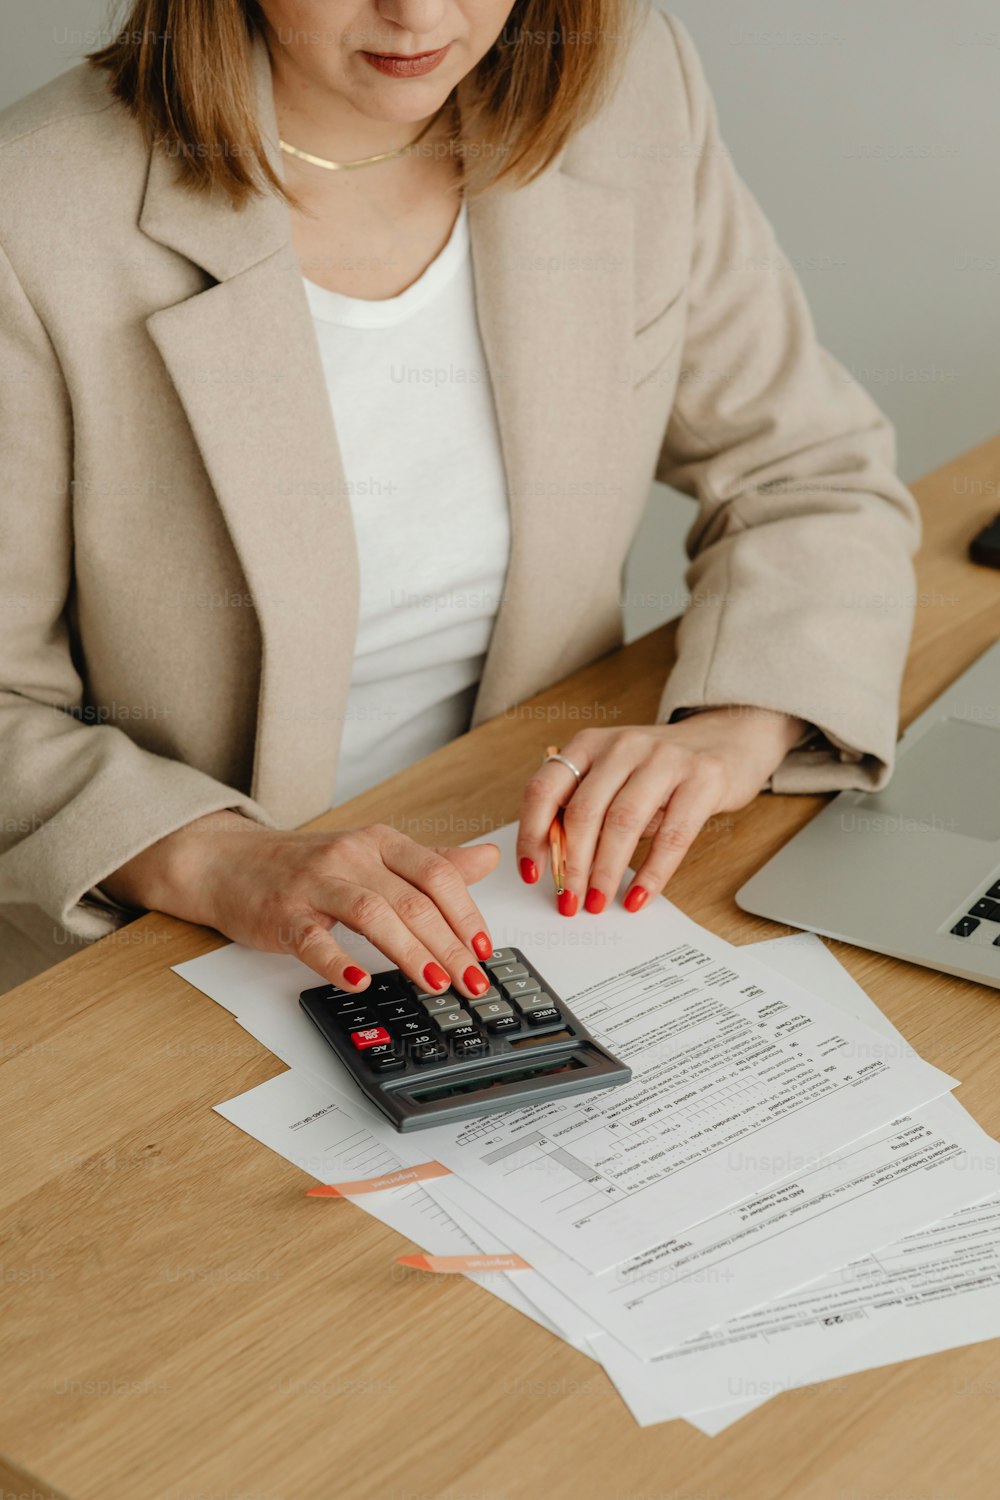 a woman sitting at a desk with a calculator